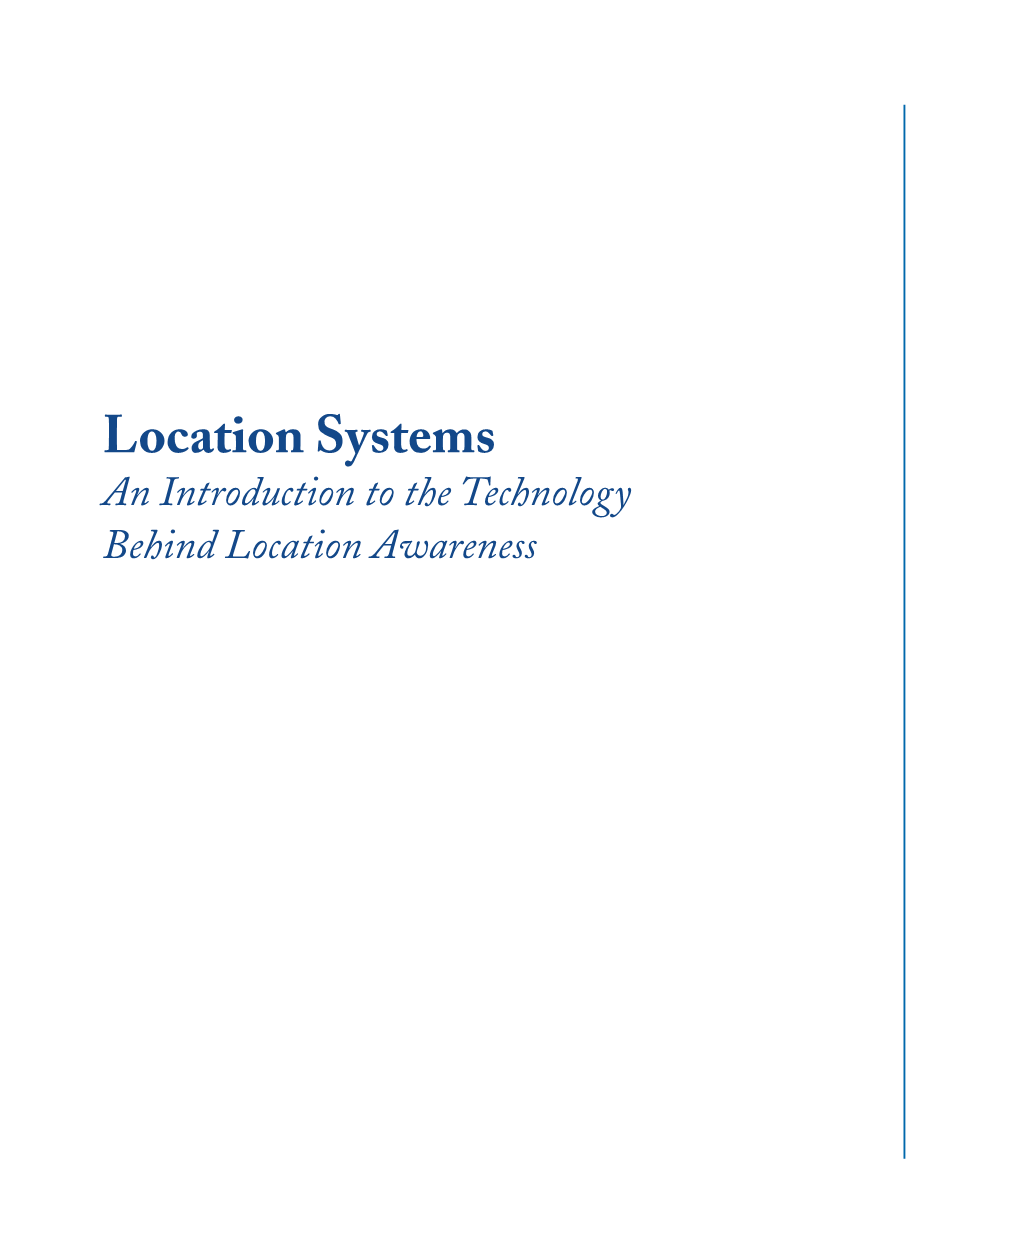 Location Systems an Introduction to the Technology Behind Location Awareness